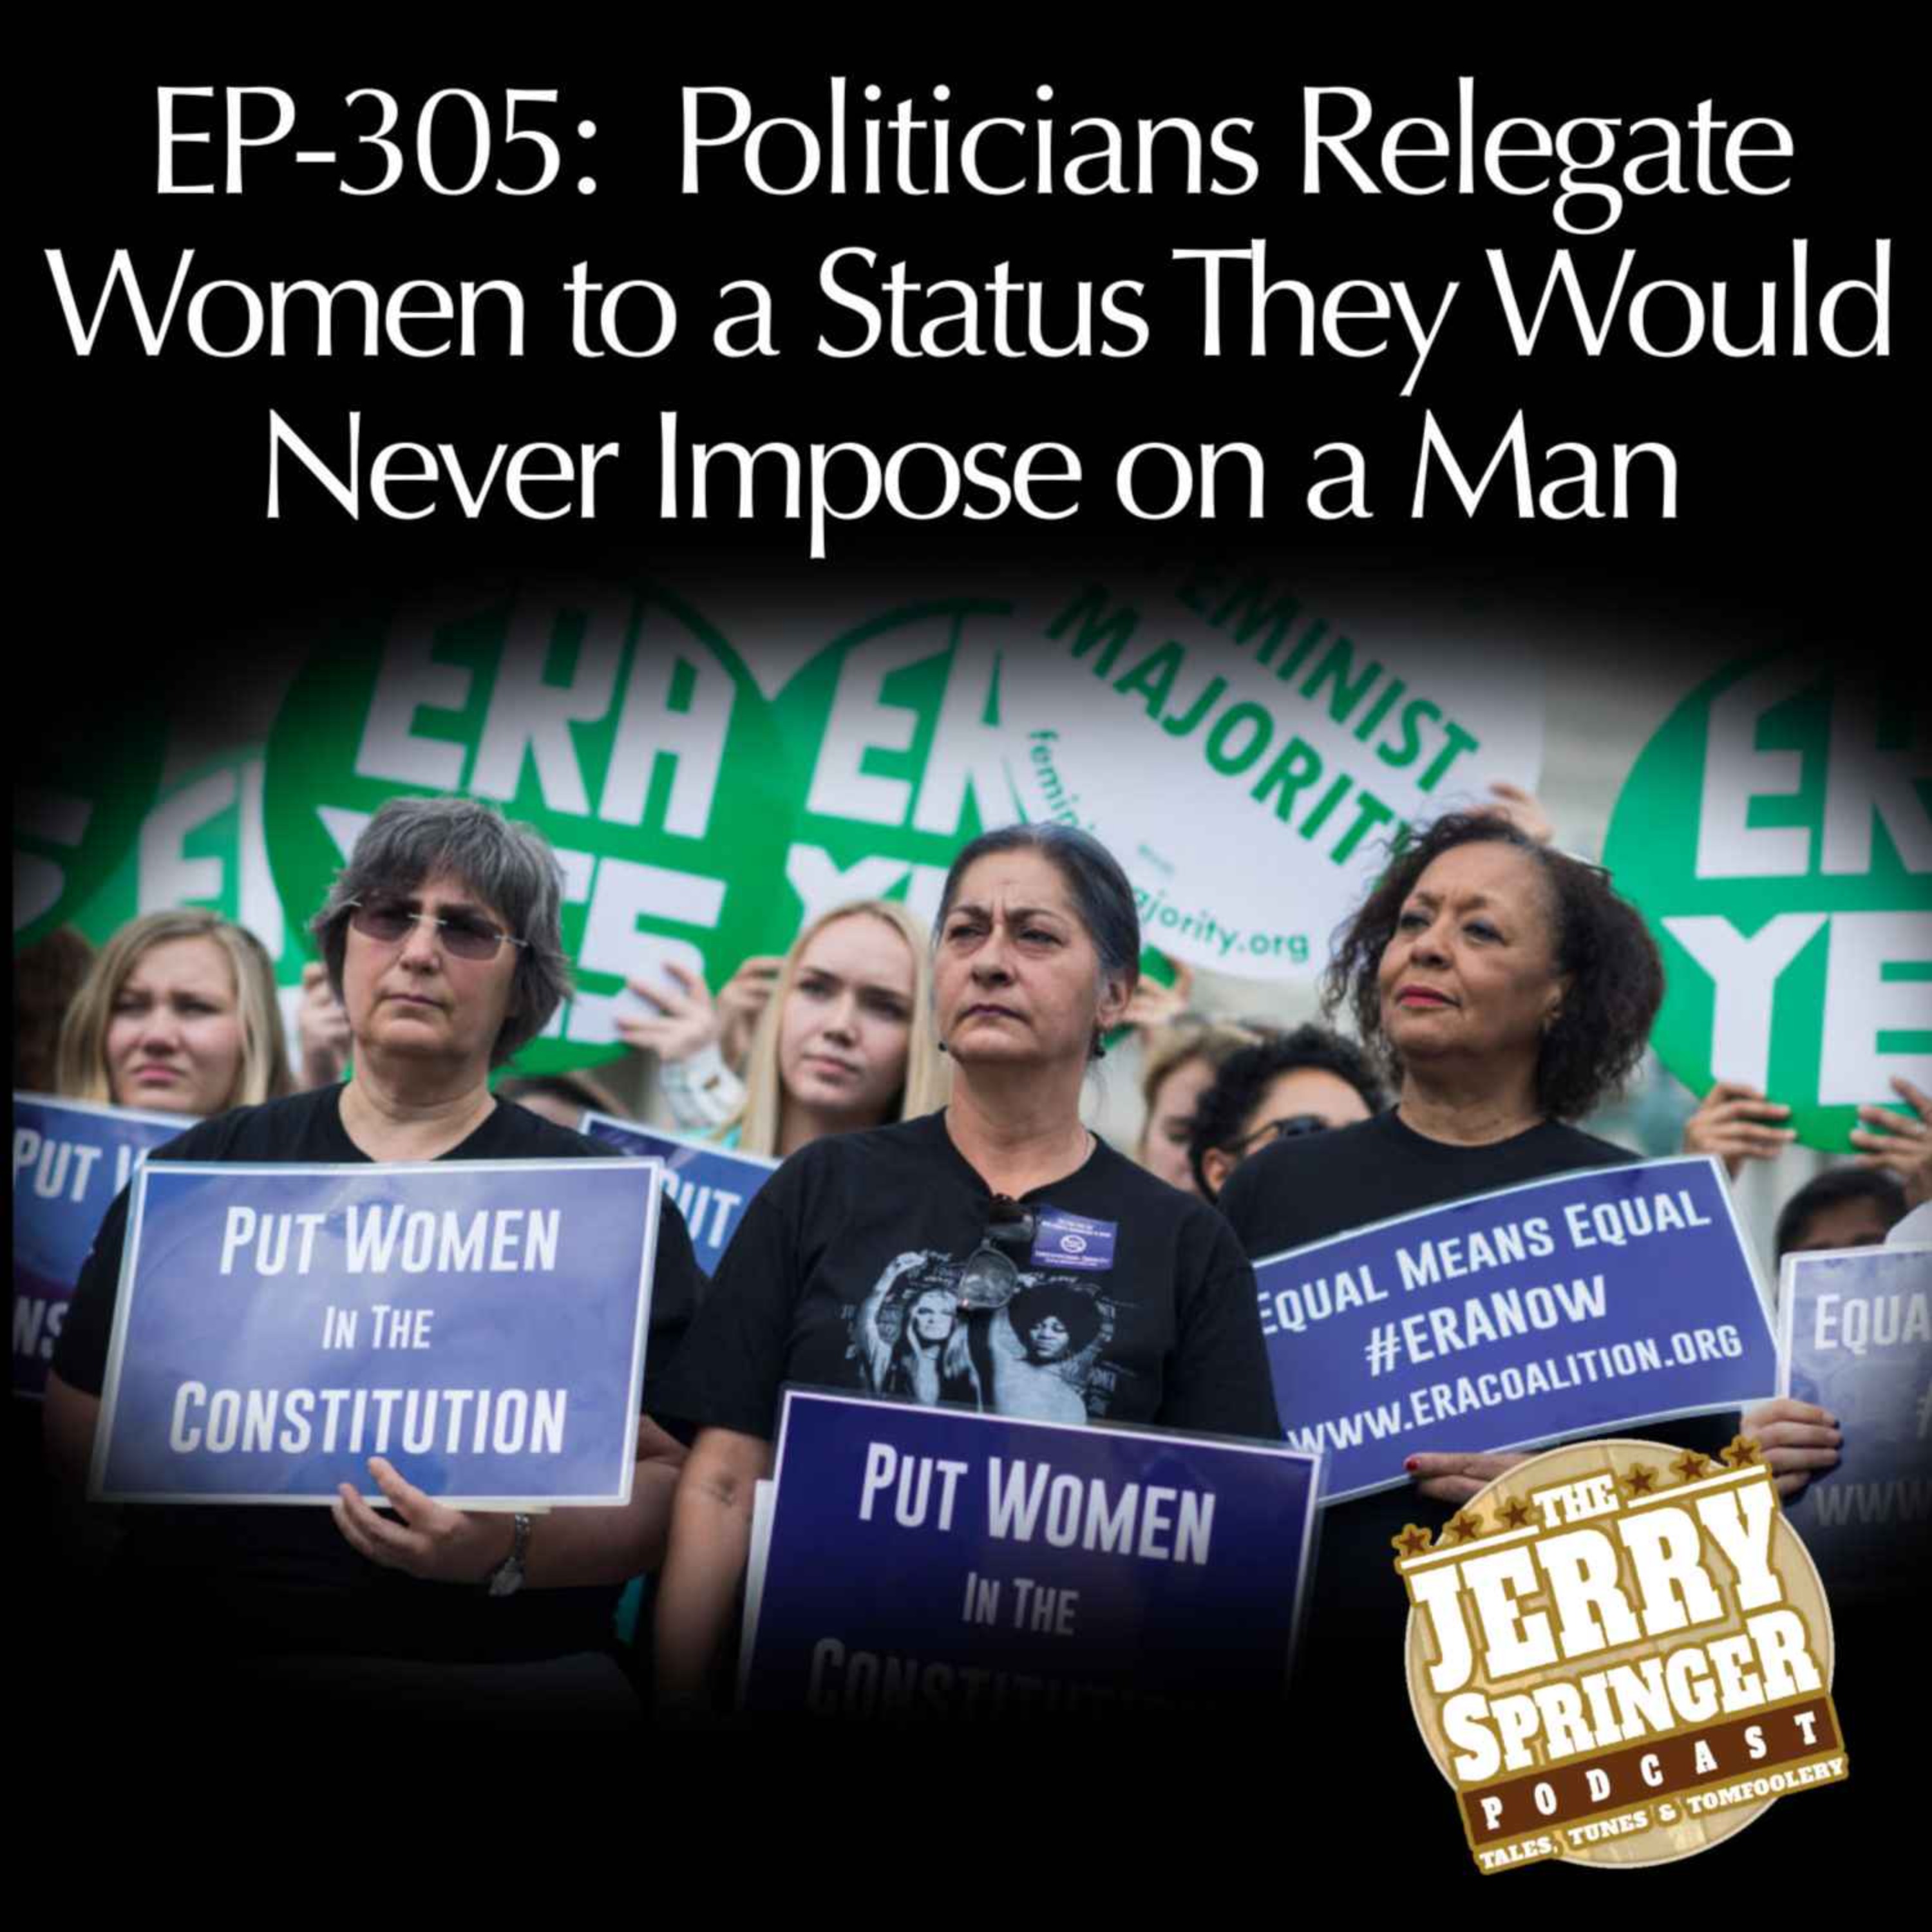 Politicians Relegate Women to a Status They Would Never Impose on a Man - EP 305